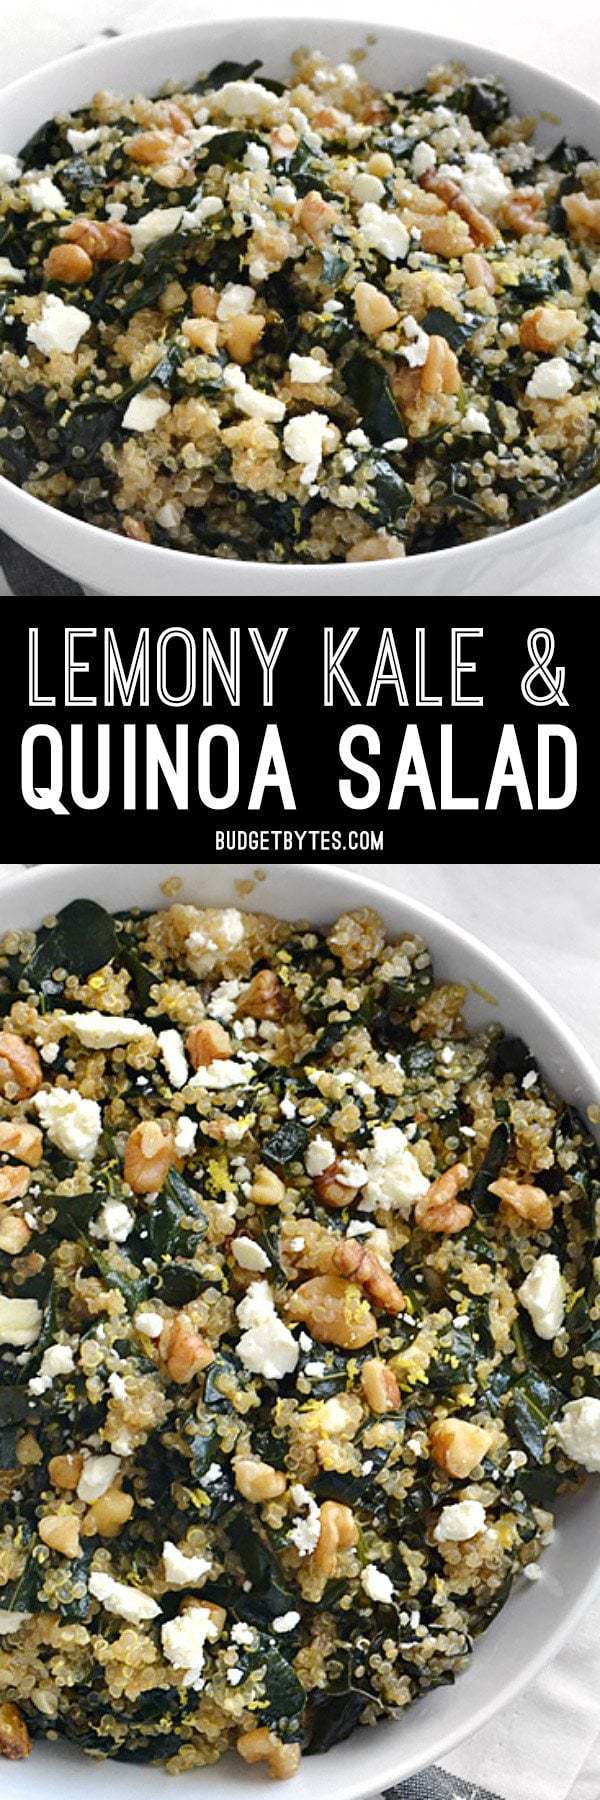 This brightly flavored kale and quinoa salad is a great way to work extra greens into your meal. Serve it cold like a salad or as a warm side dish.